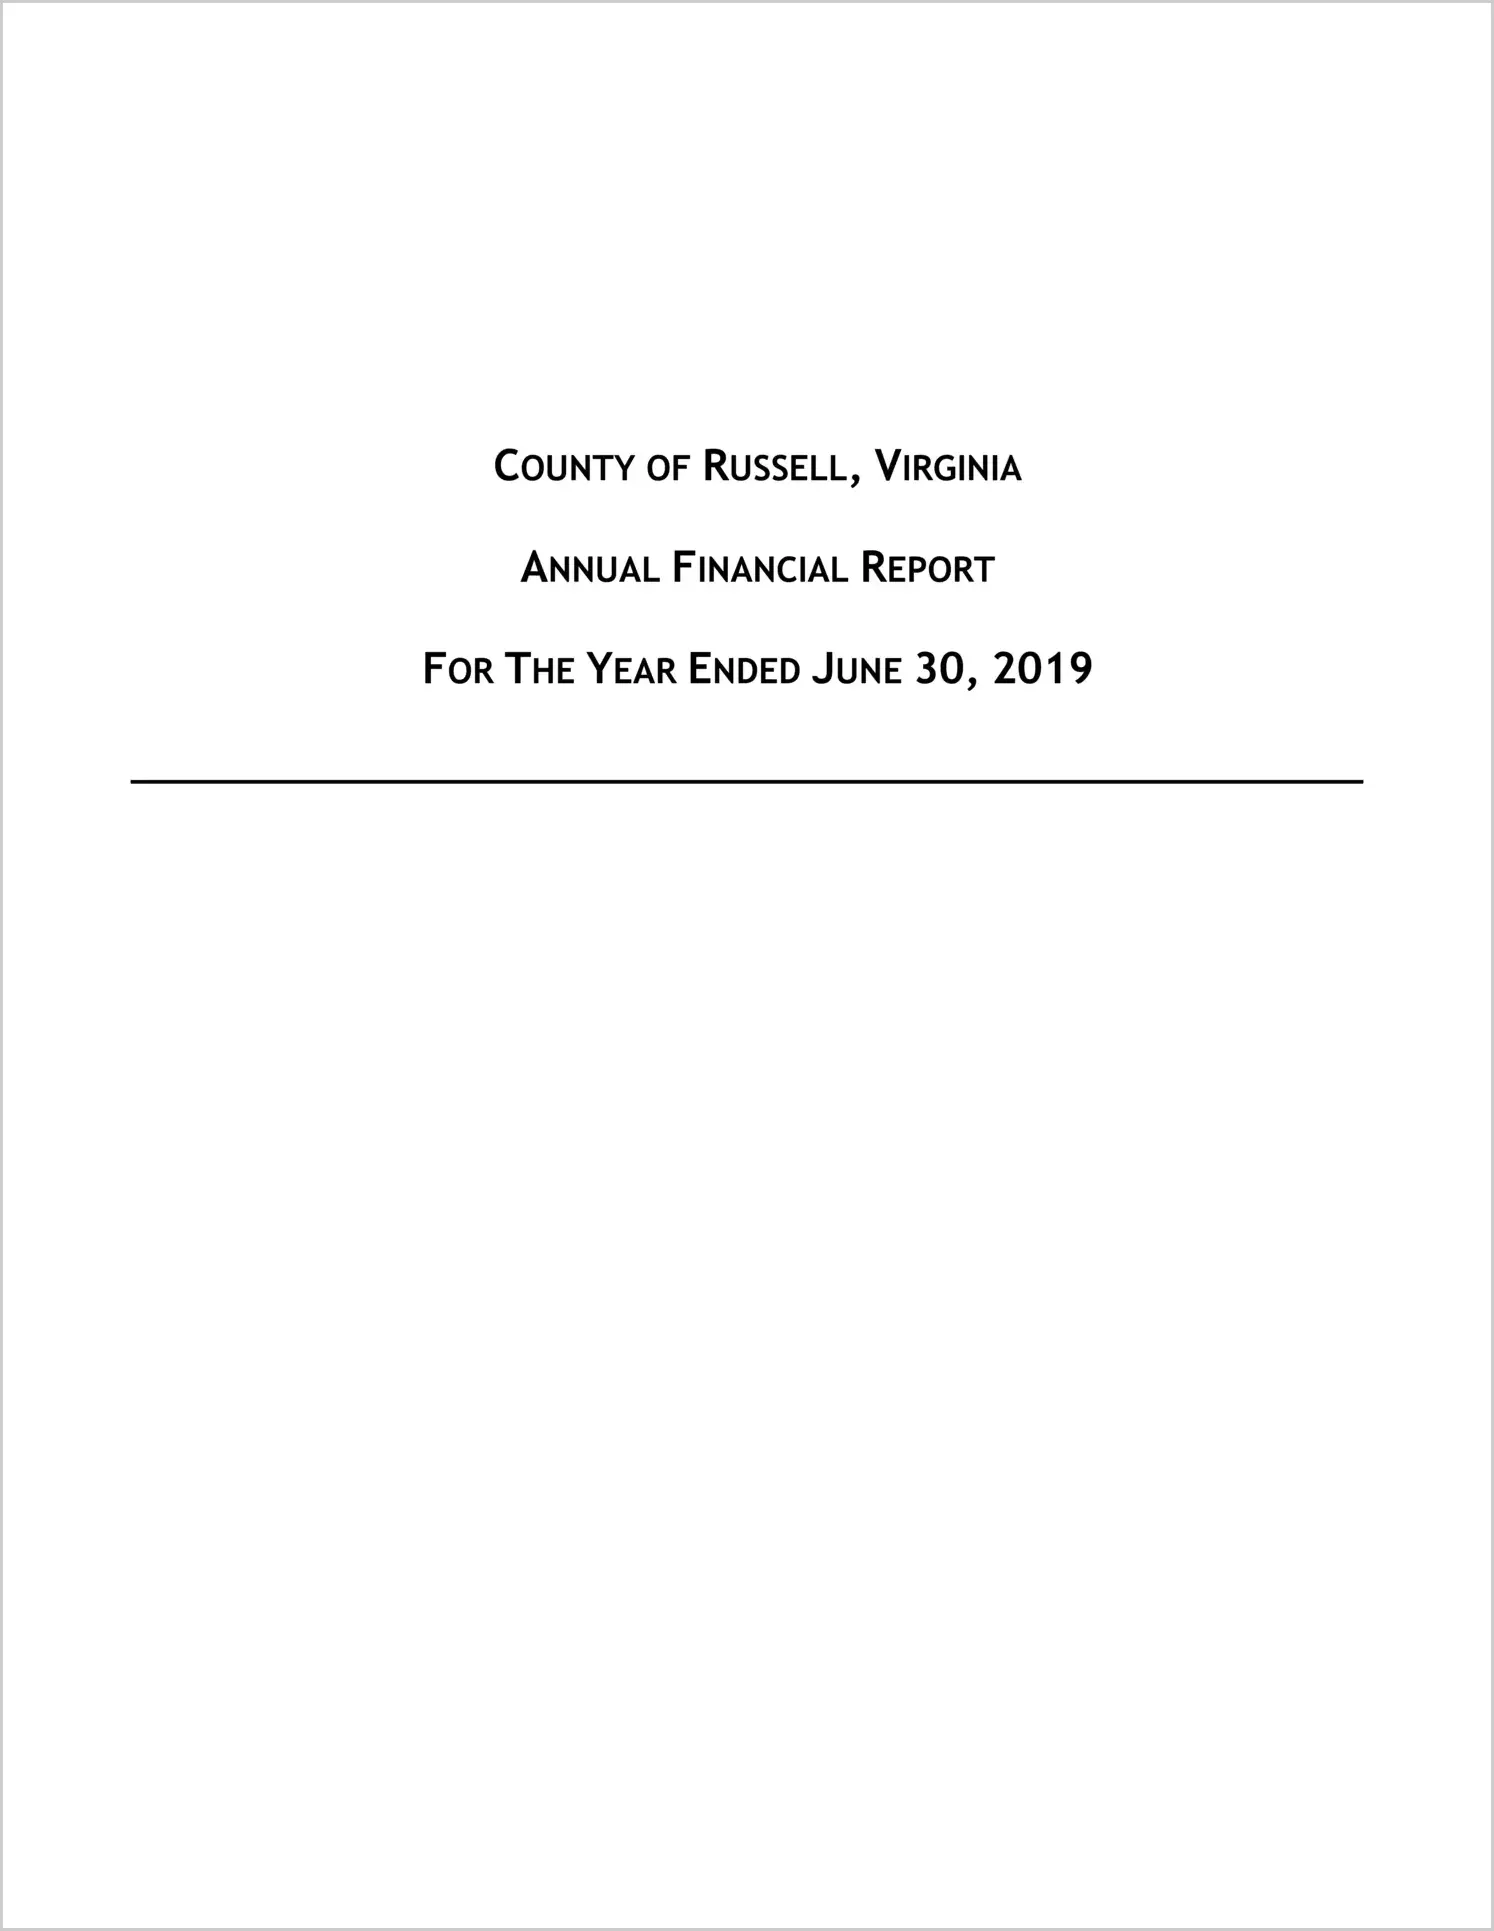 2019 Annual Financial Report for County of Russell